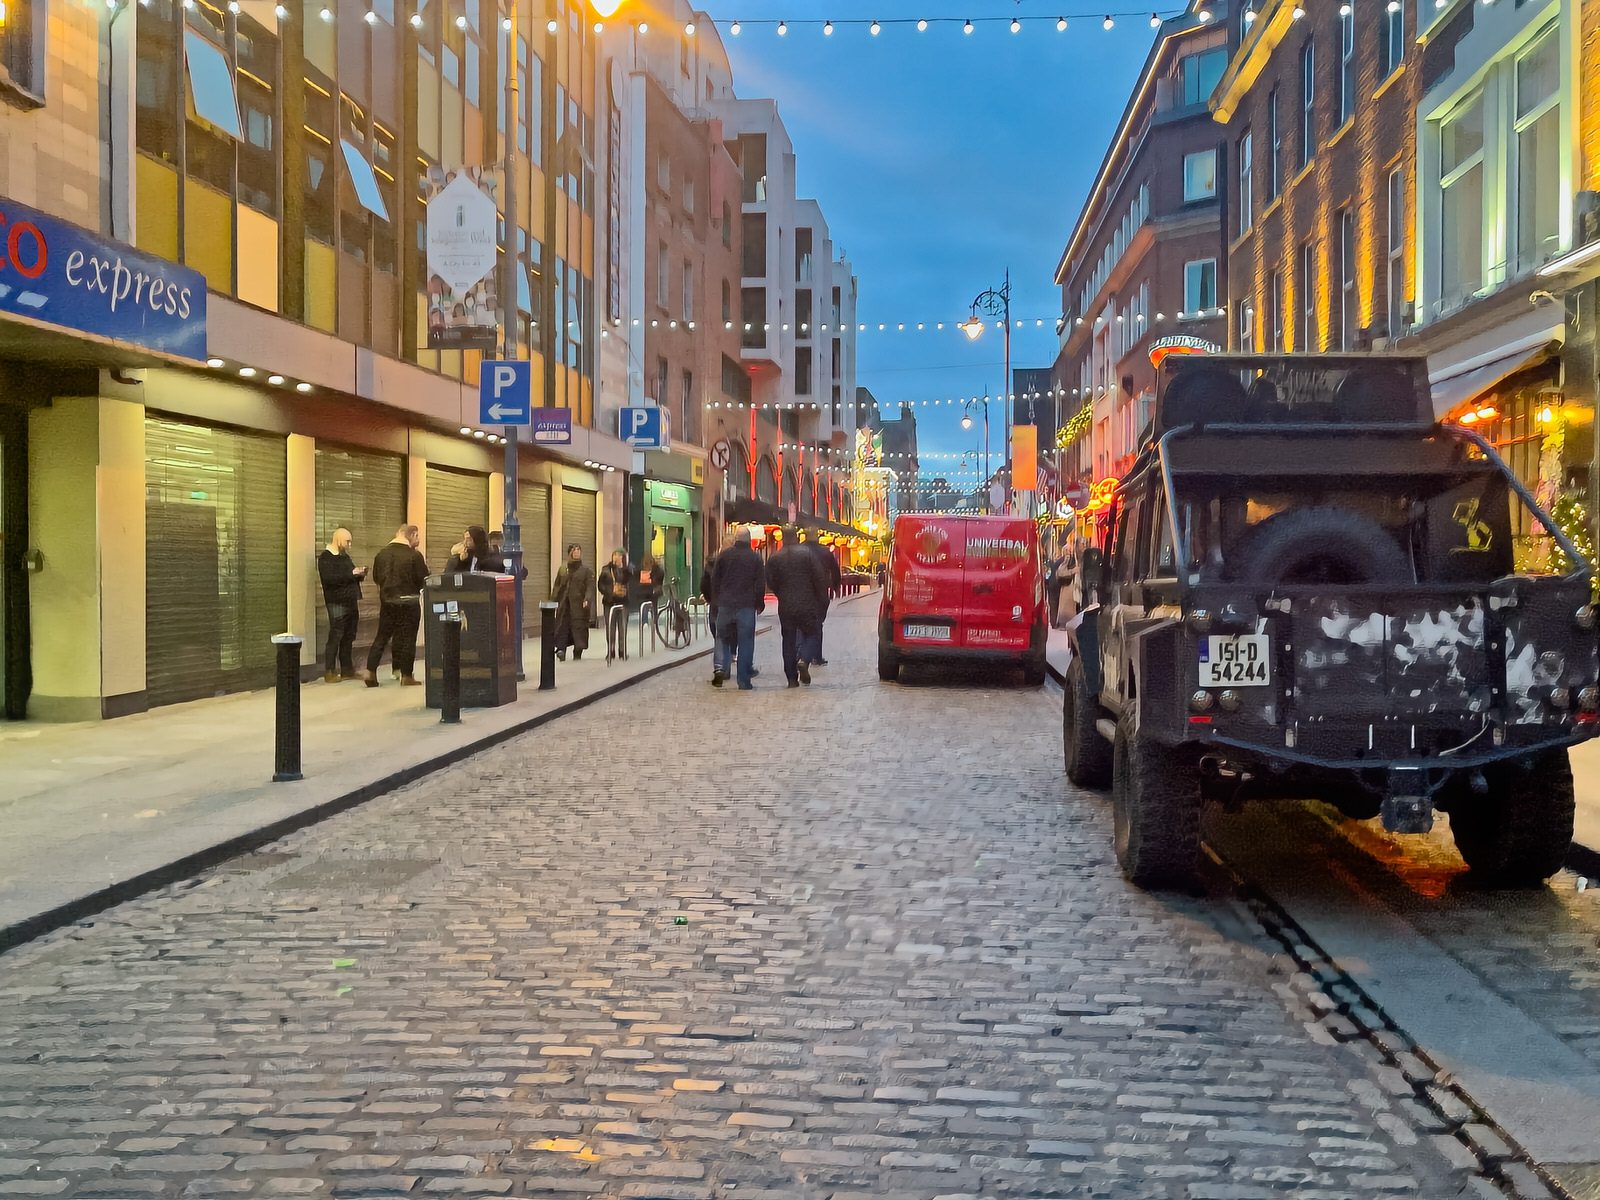 I VISITED TEMPLE BAR TODAY [AS NIGHTFALL WAS APPROACHING]-225325-1